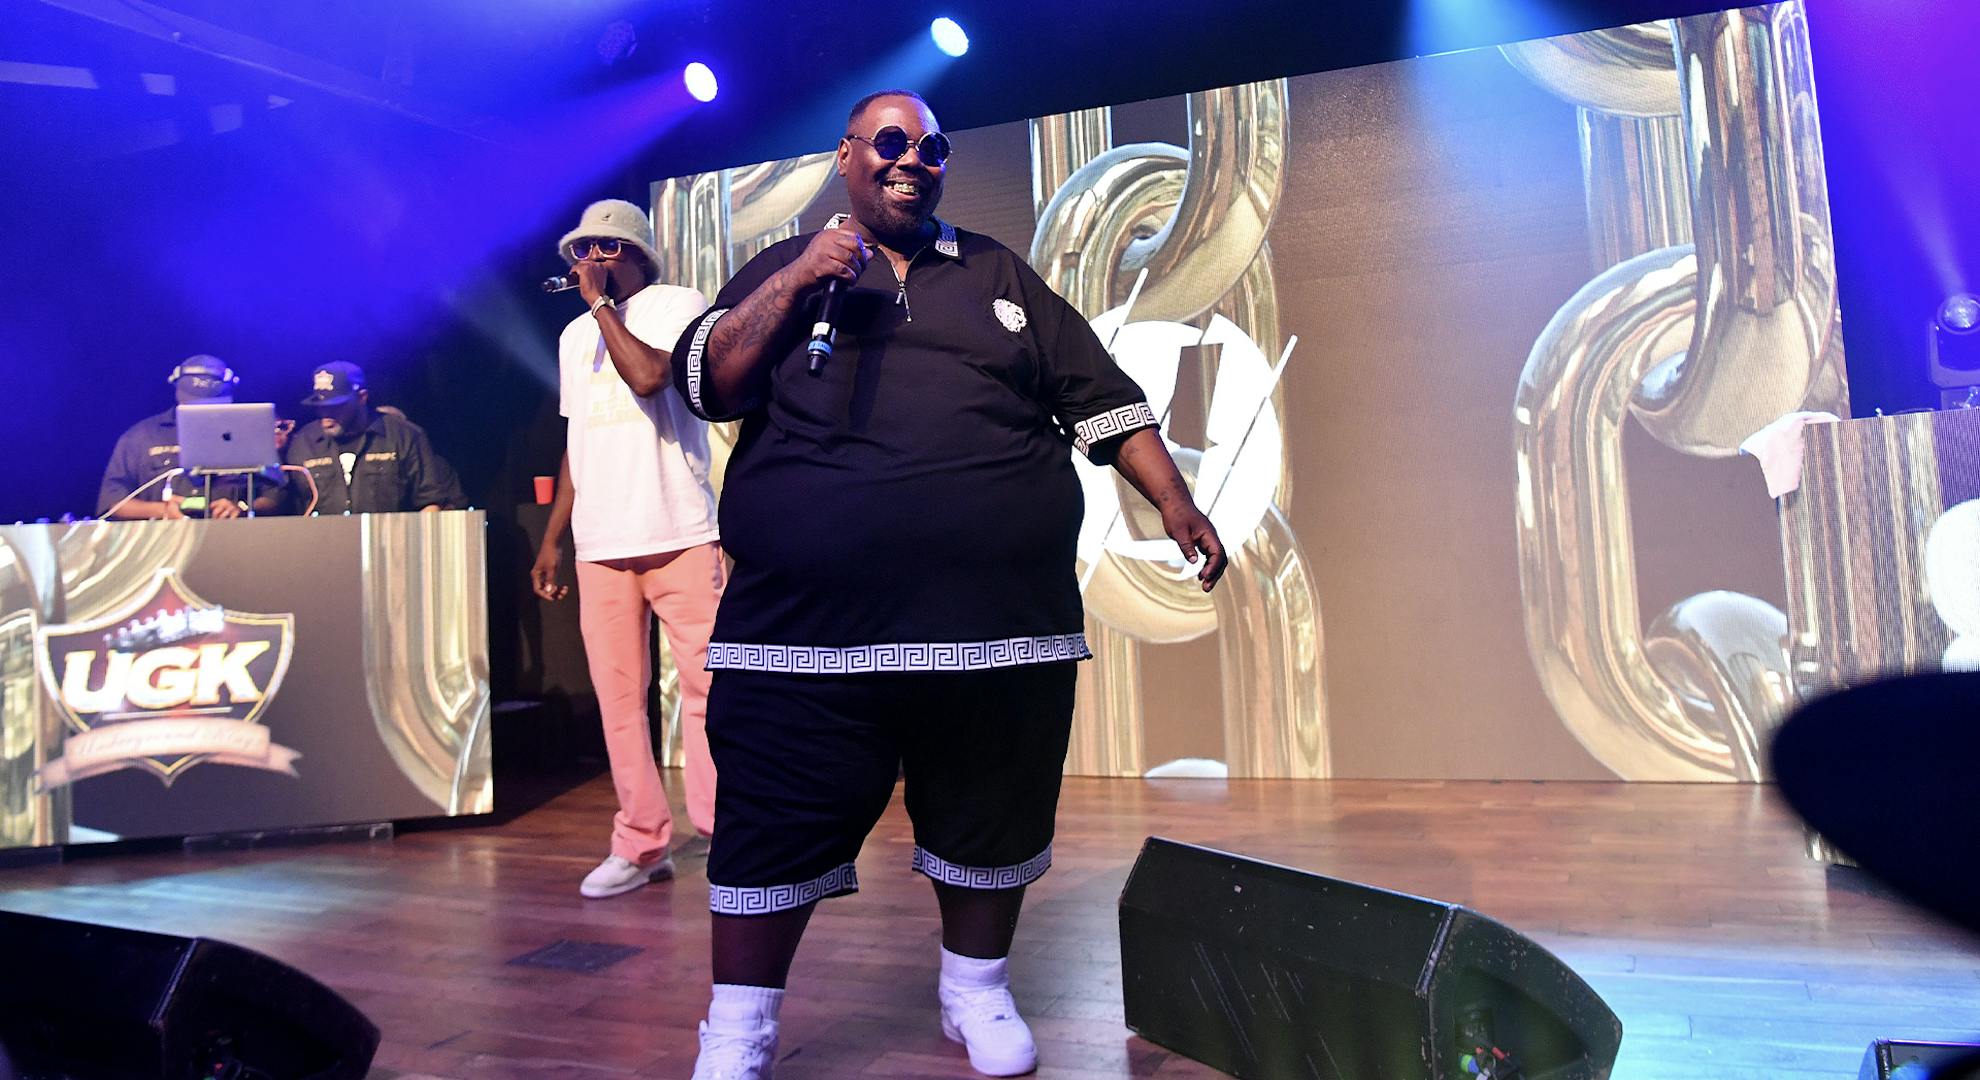 MJG and 8Ball perform onstage during VERZUZ 8 Ball & MJG vs UGK at Terminal West on May 26, 2022 in Atlanta, Georgia. (Photo by Paras Griffin/Getty Images)